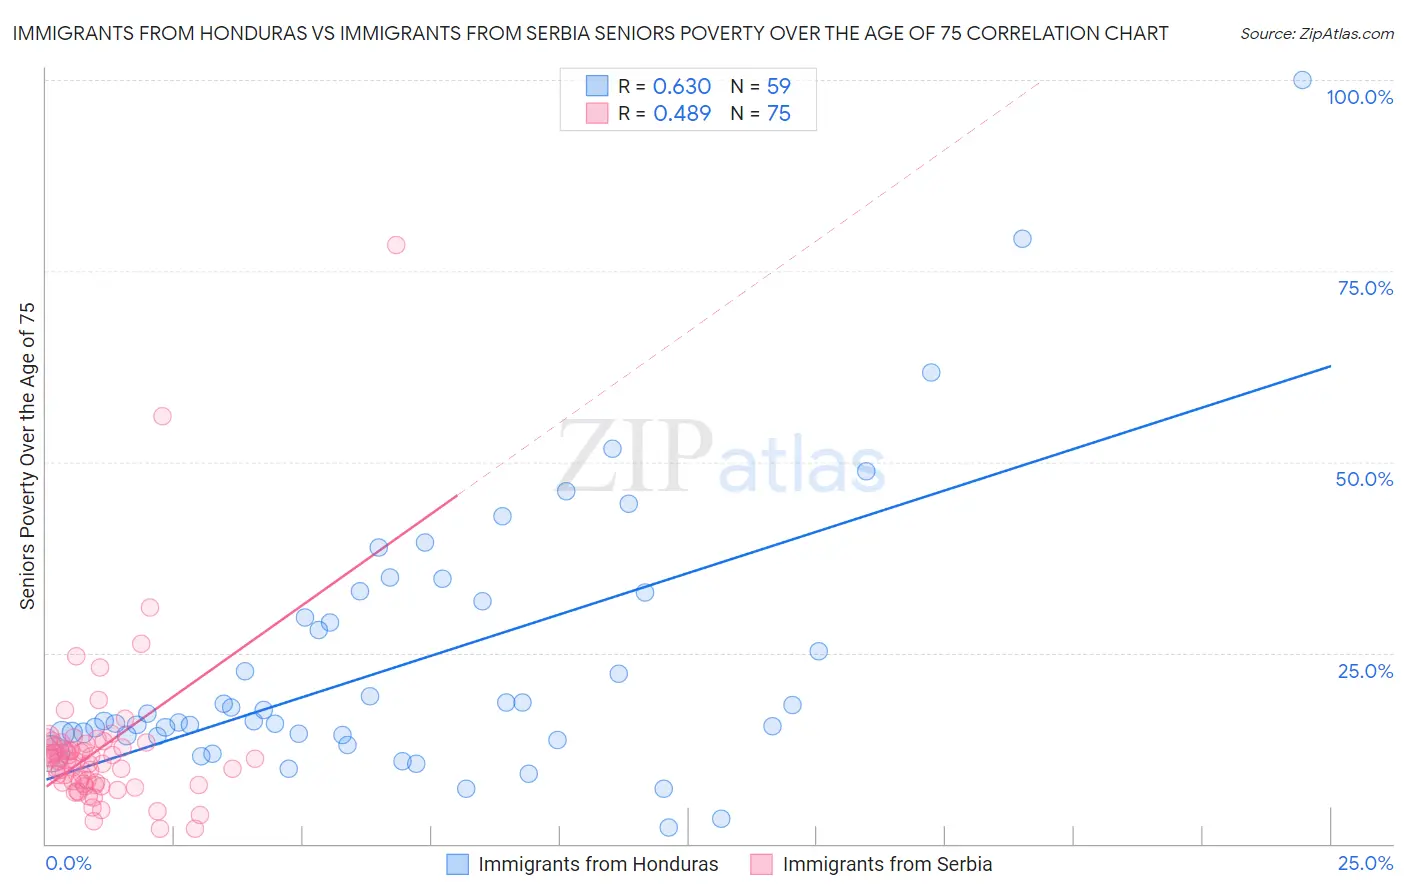 Immigrants from Honduras vs Immigrants from Serbia Seniors Poverty Over the Age of 75